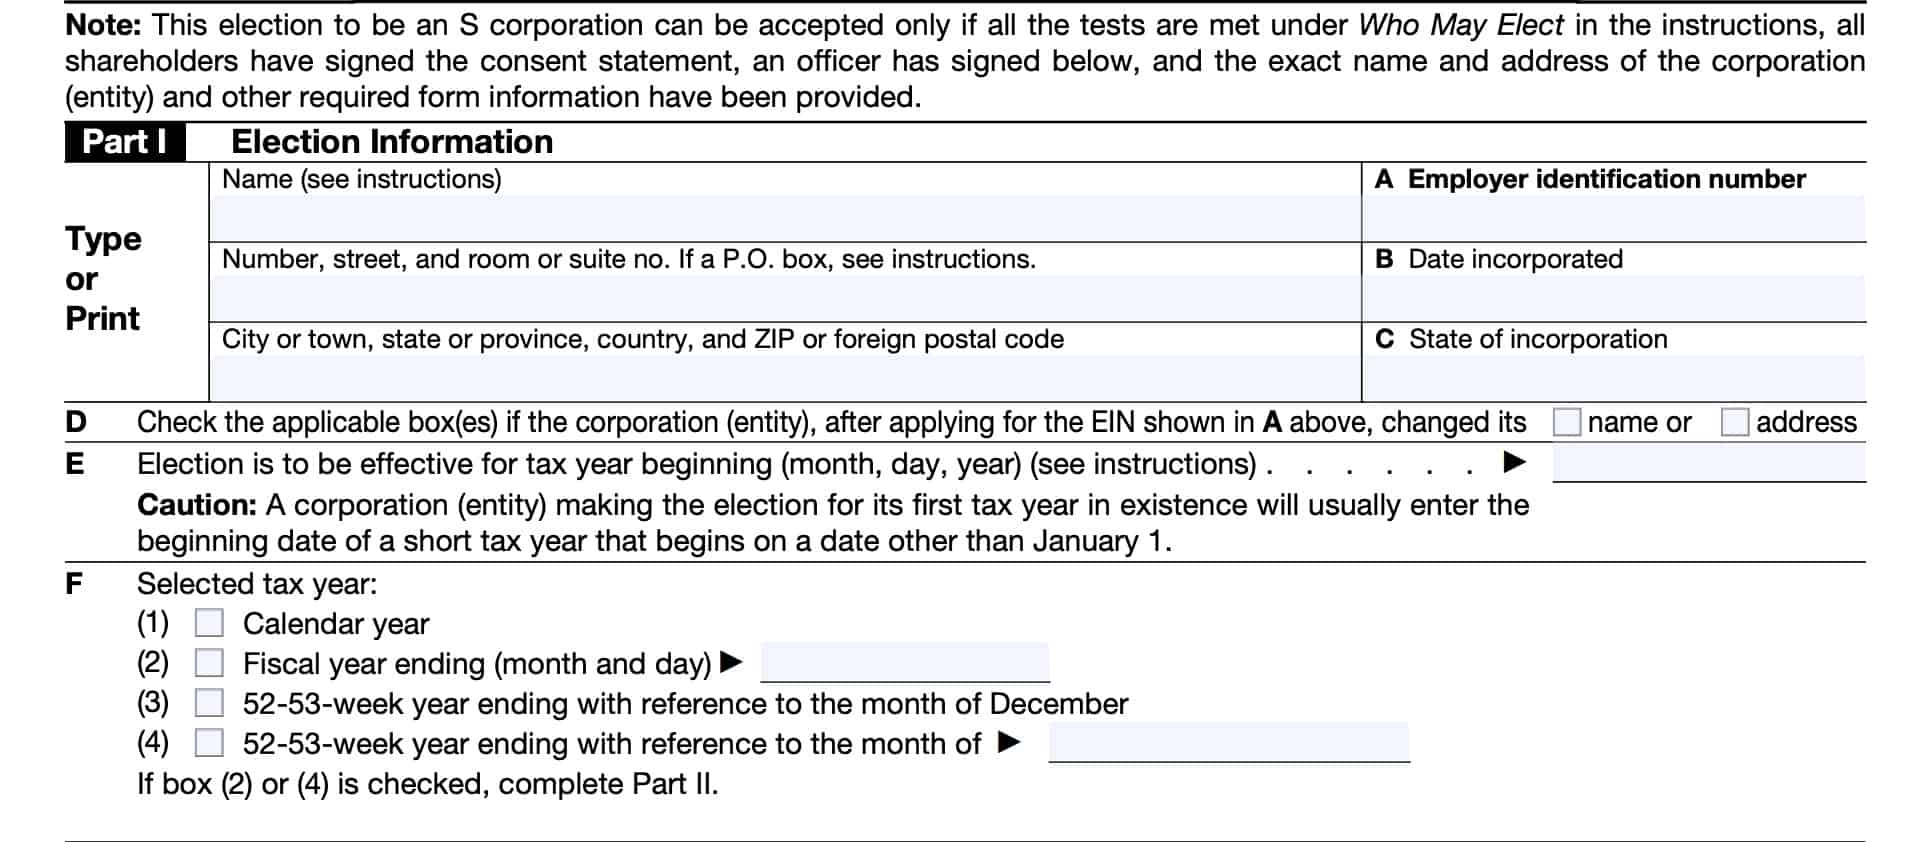 irs form 2553, part i, election information